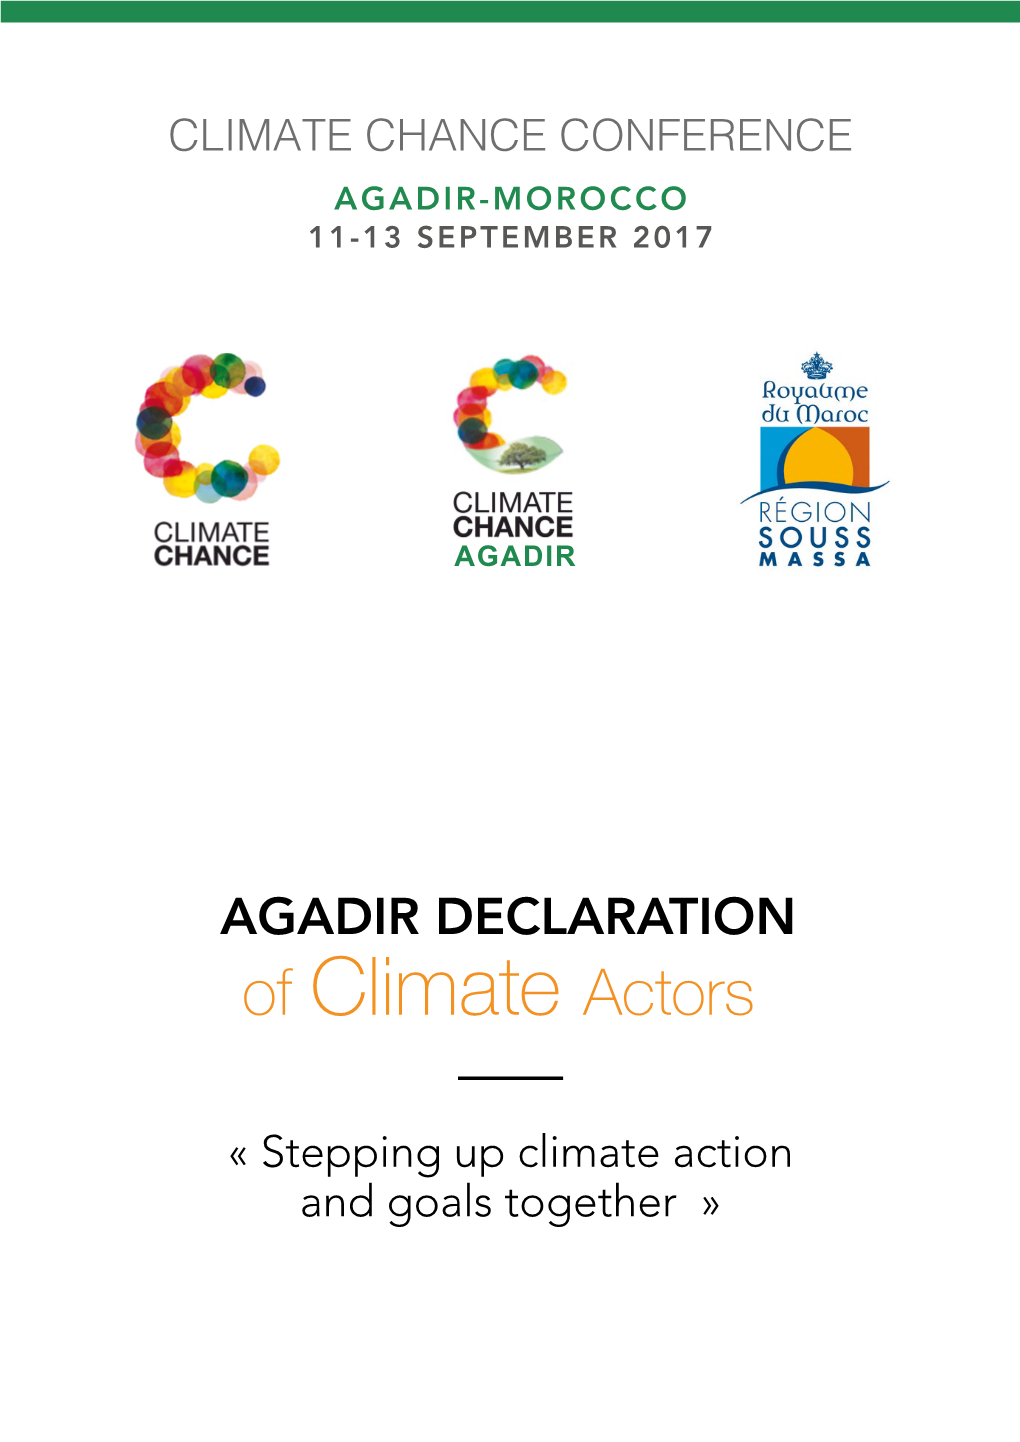 Of Climate Actors